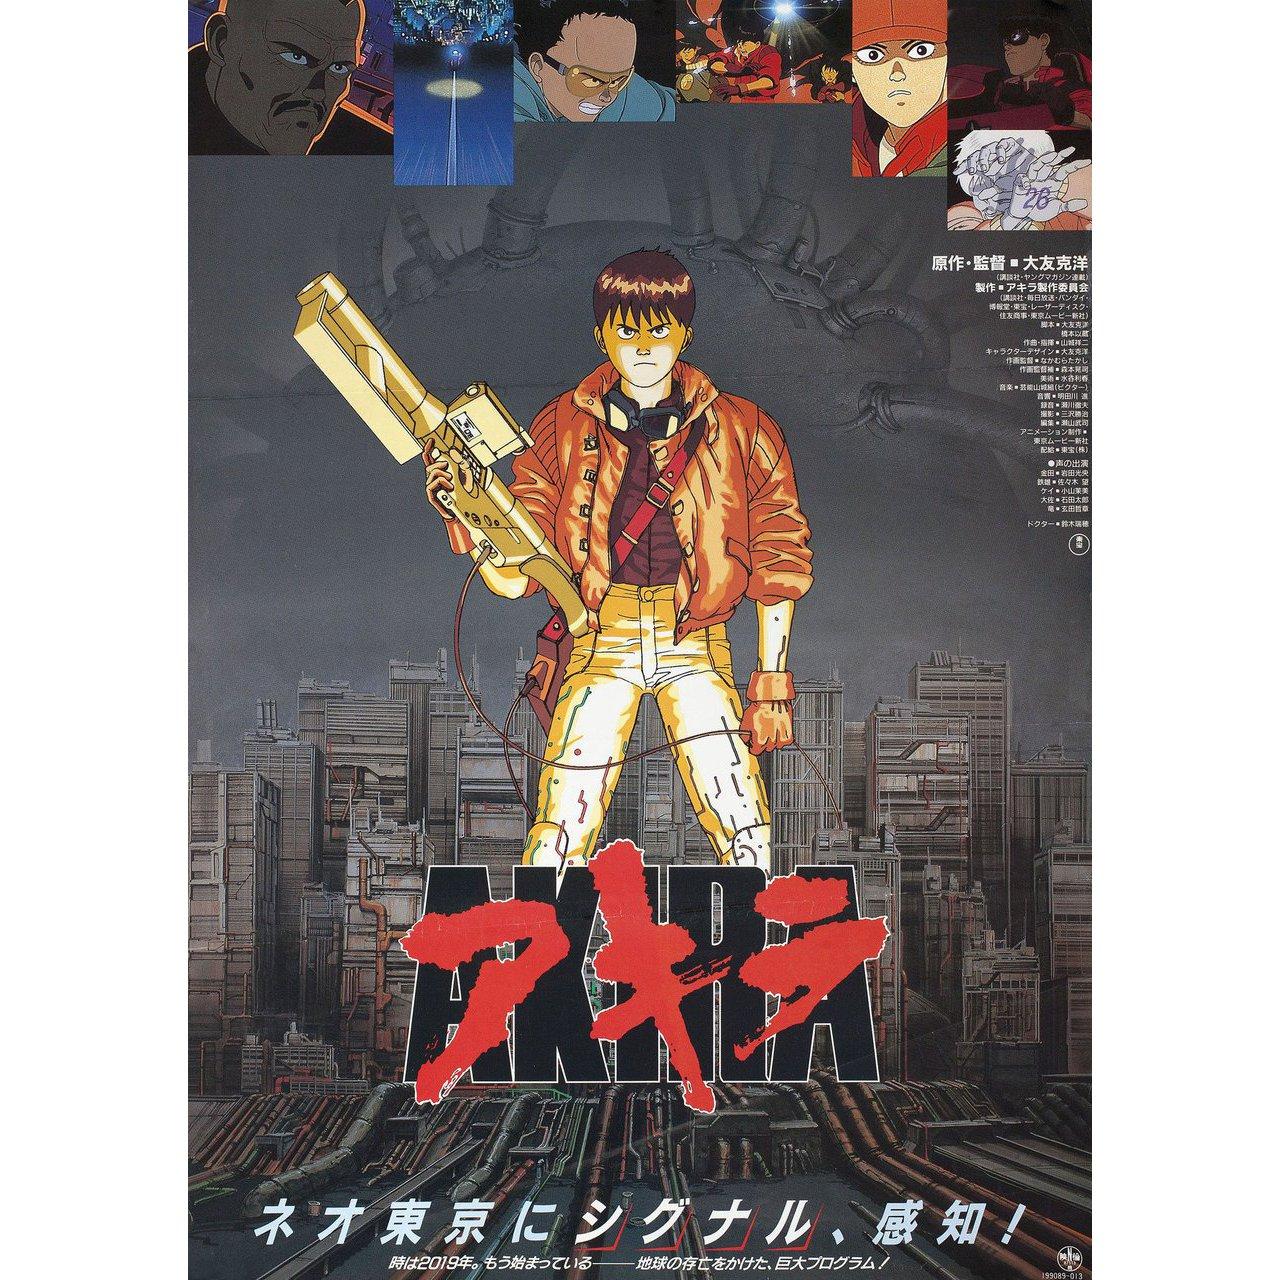 Original 1988 Japanese B2 poster for the film Akira directed by Katsuhiro Ohtomo with Mitsuo Iwata / Nozomu Sasaki / Mami Koyama / Tessho Genda. Very good-fine condition, rolled. Please note: the size is stated in inches and the actual size can vary